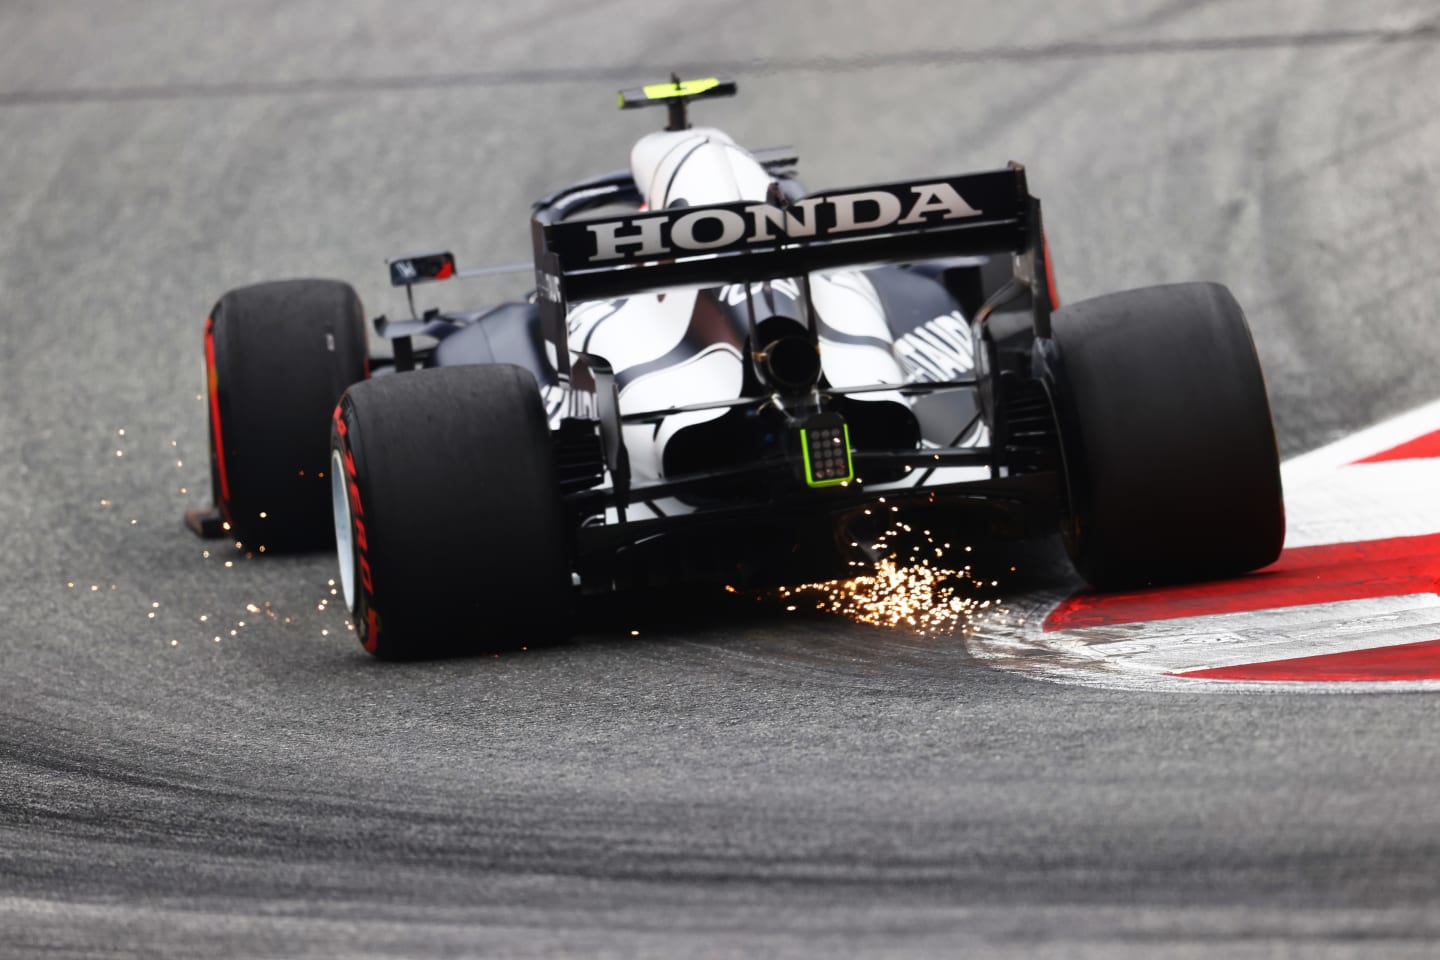 SPIELBERG, AUSTRIA - JULY 02: Sparks fly behind Pierre Gasly of France driving the (10) Scuderia AlphaTauri AT02 Honda during practice ahead of the F1 Grand Prix of Austria at Red Bull Ring on July 02, 2021 in Spielberg, Austria. (Photo by Clive Rose/Getty Images)